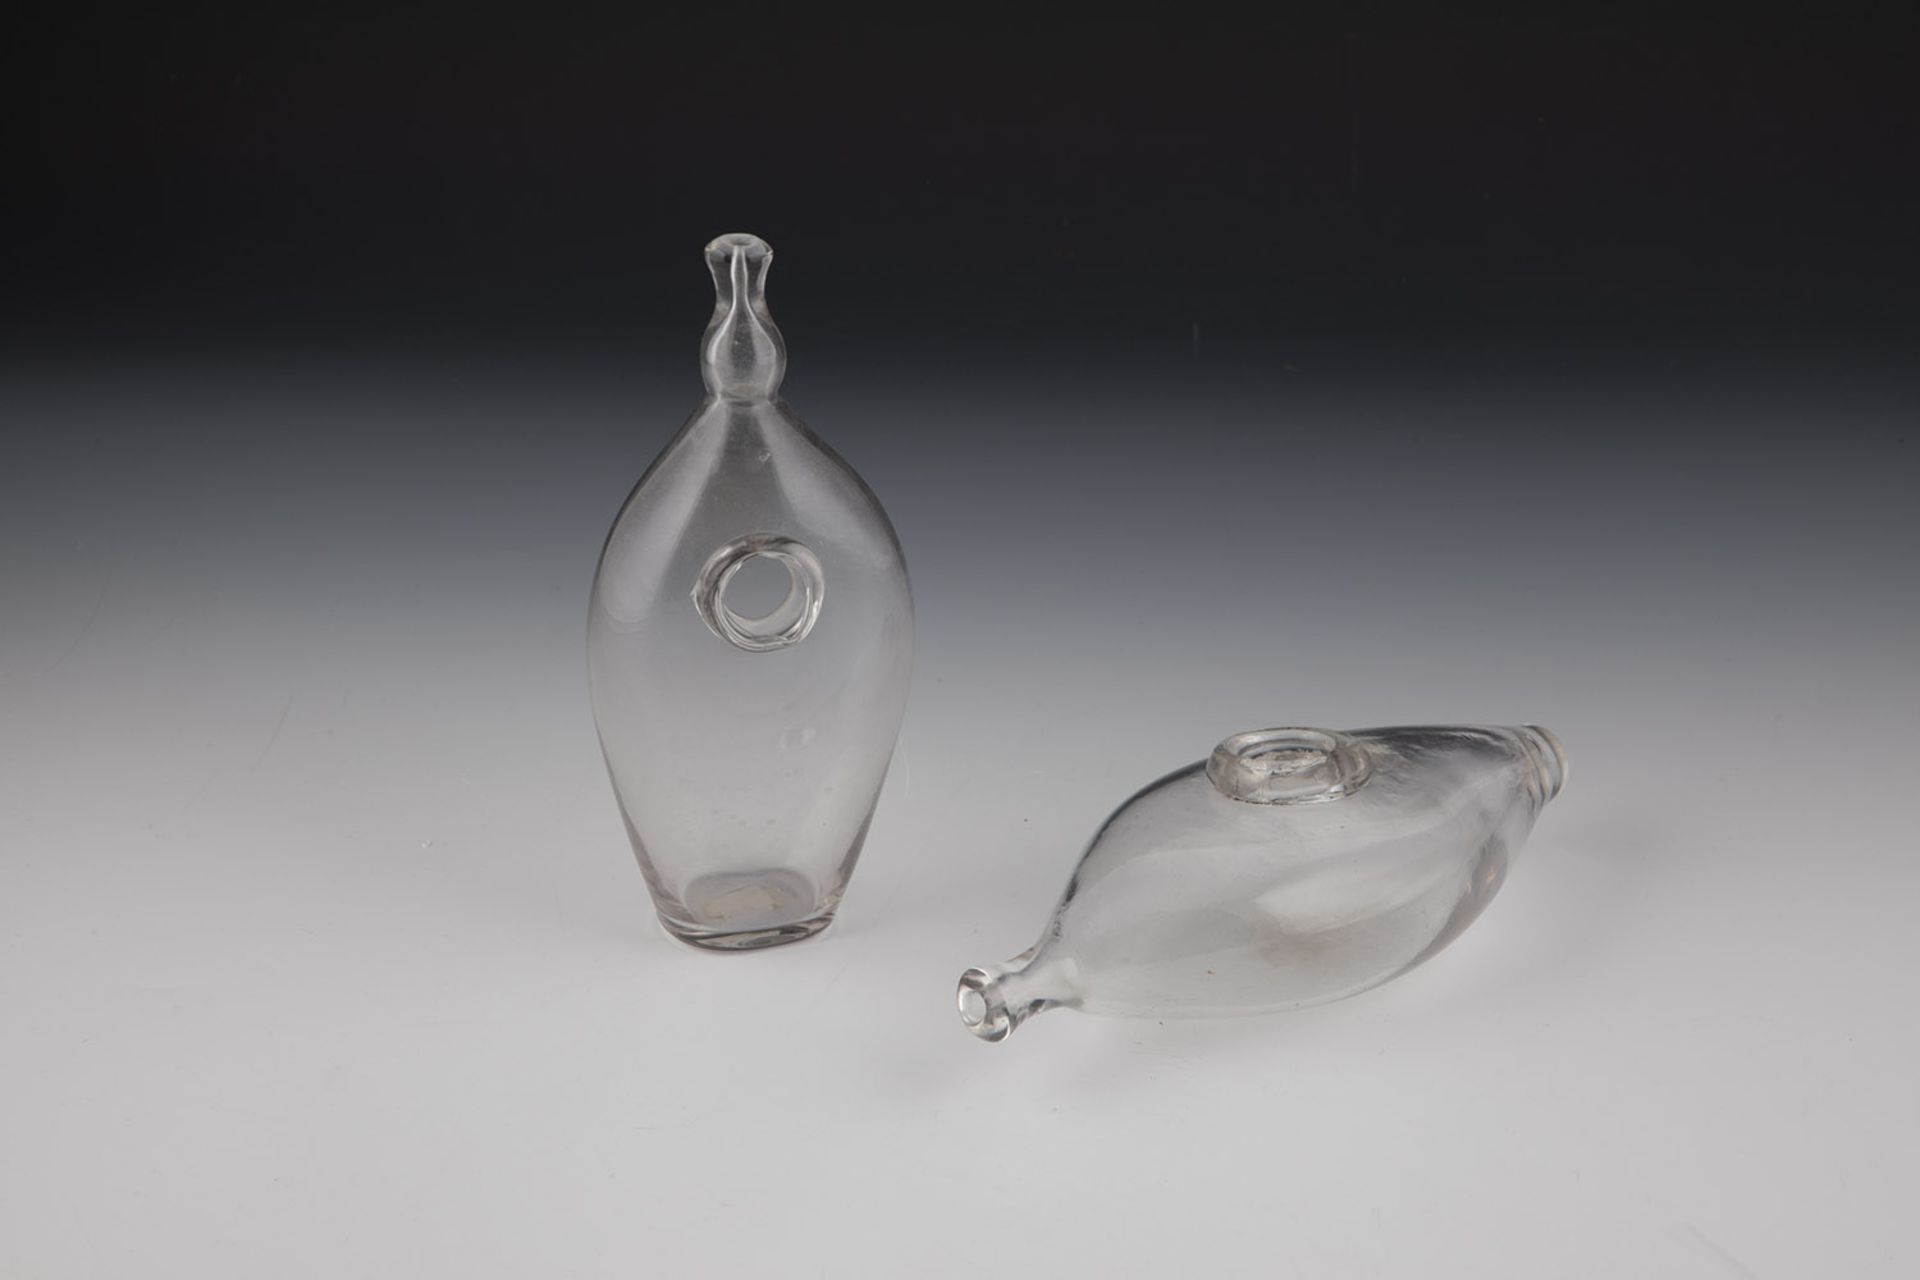 Two feeding bottles France, 20th century grey-tinted glass. 18.5 to 20.5 cm.